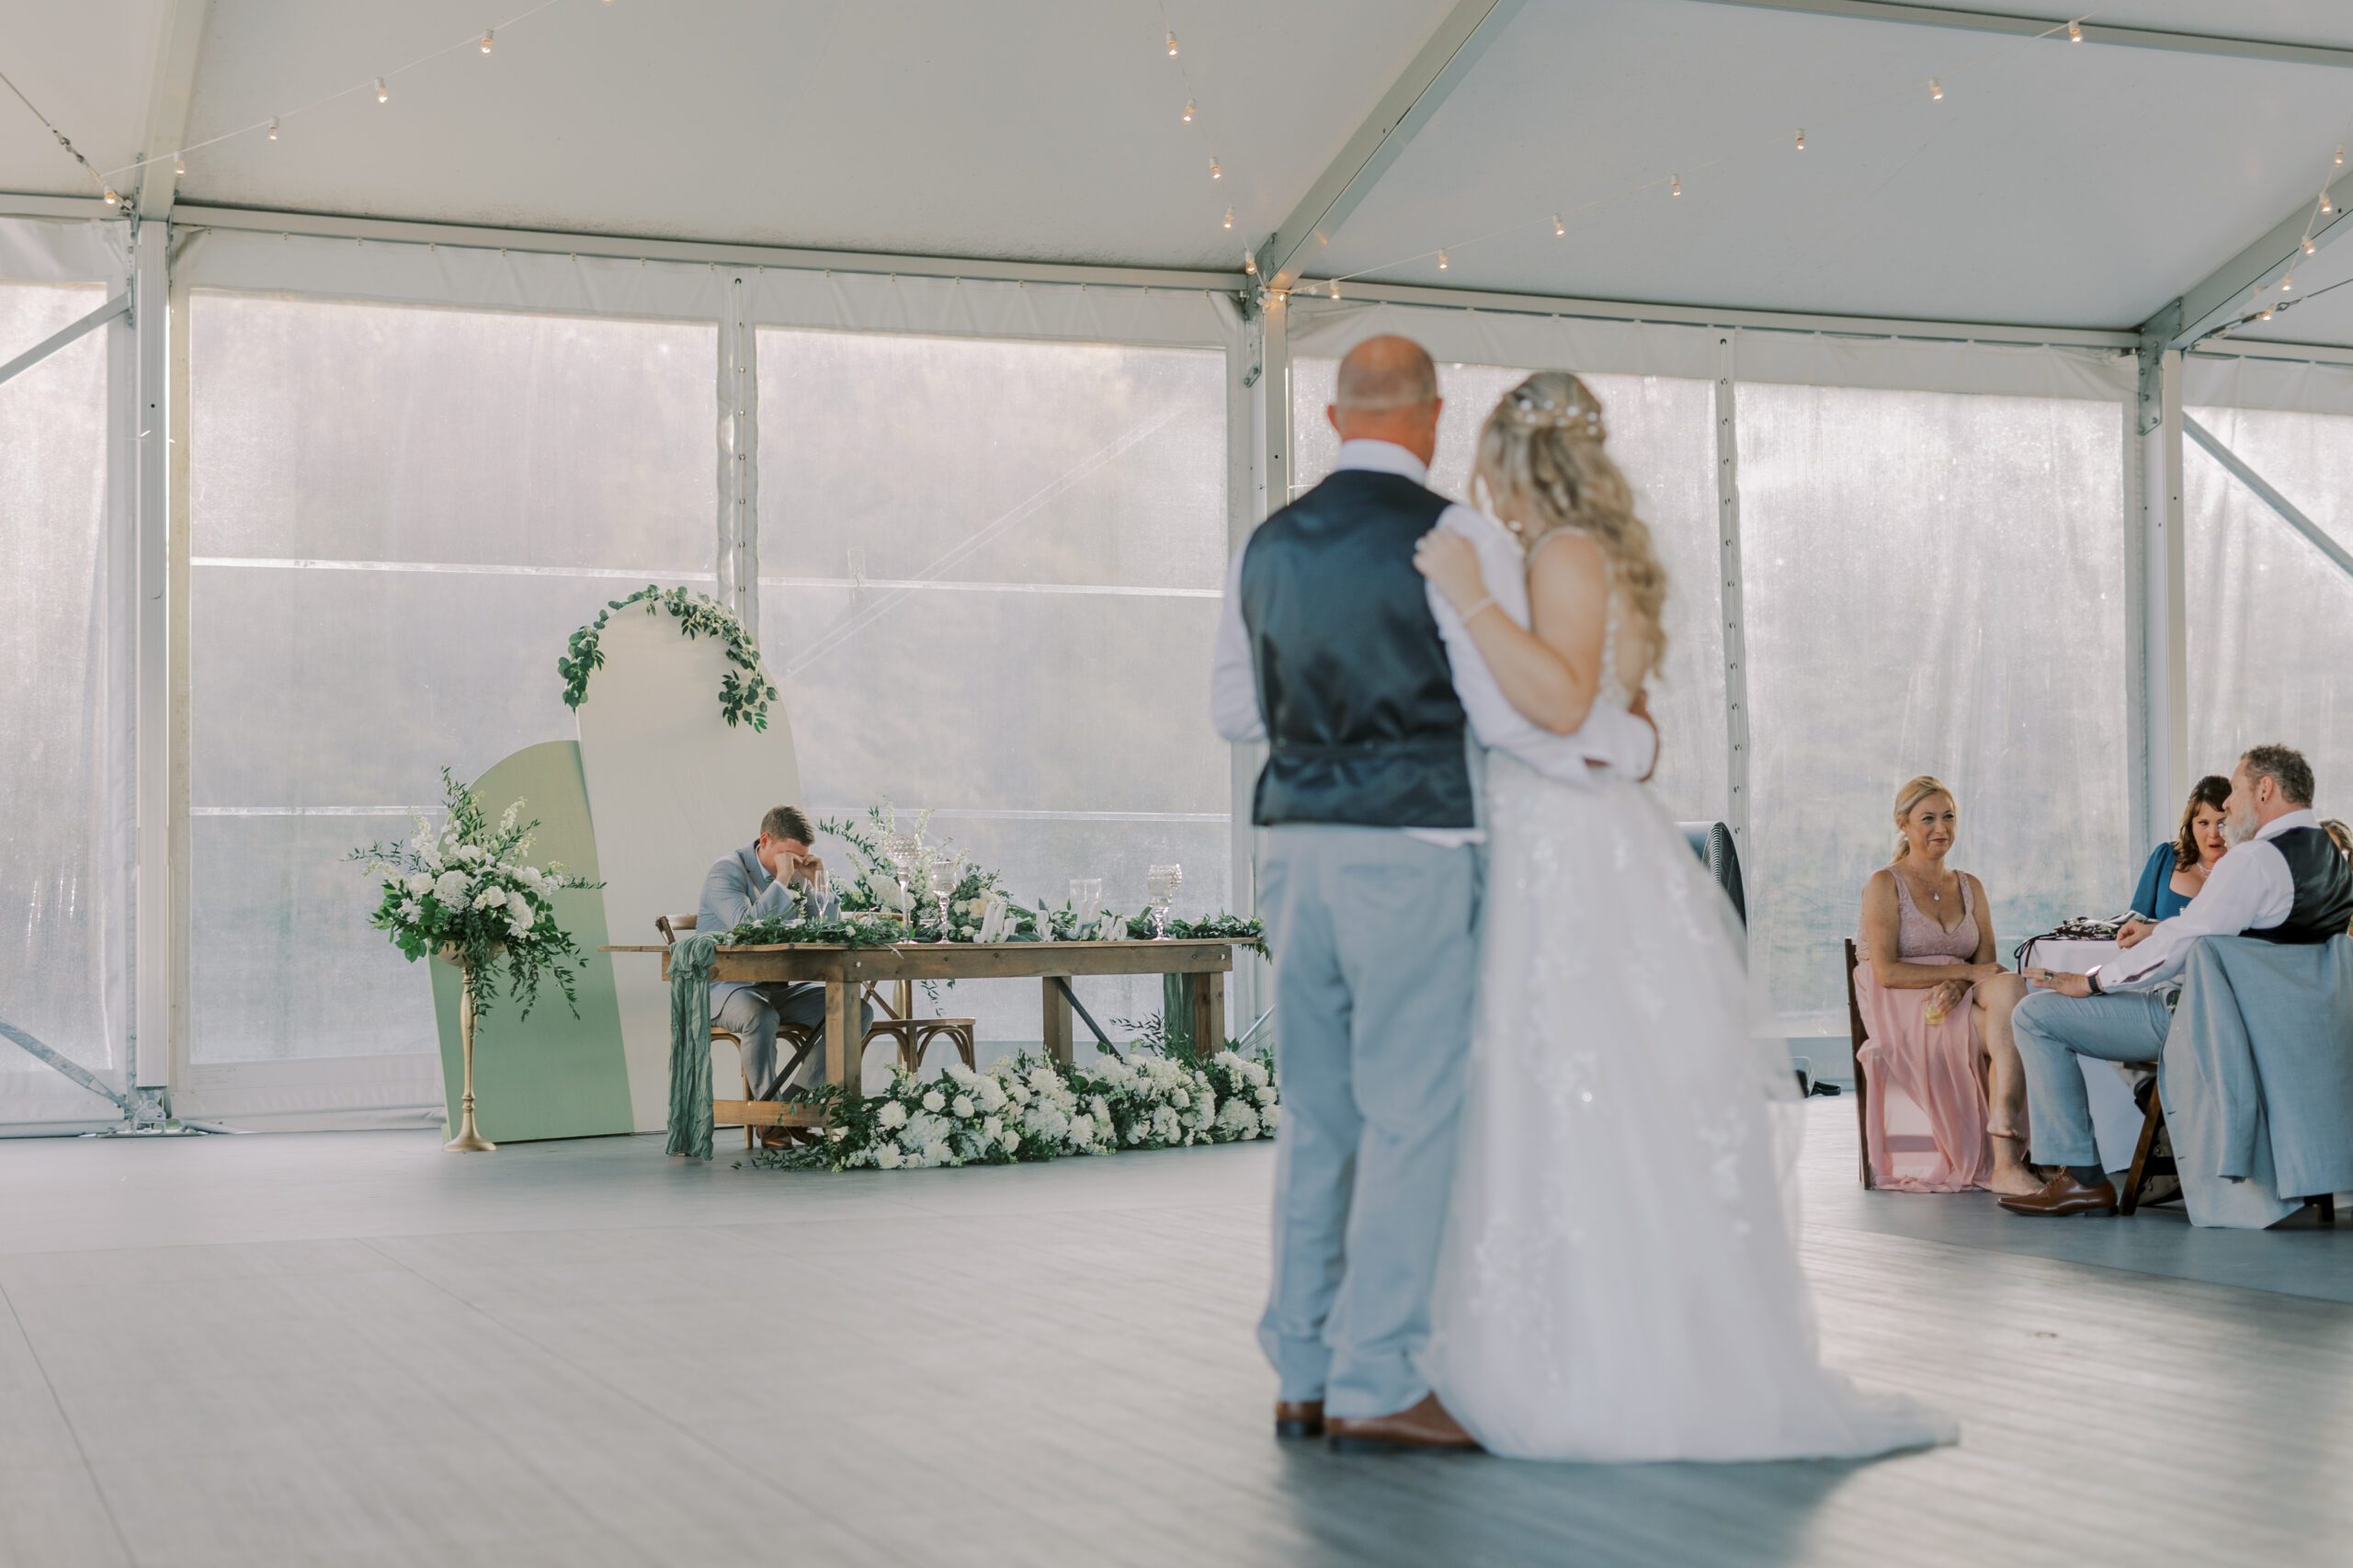 Bride and her father, out of focus dancing looking over at the groom who is in focus, clearly emotional with his face in his hands